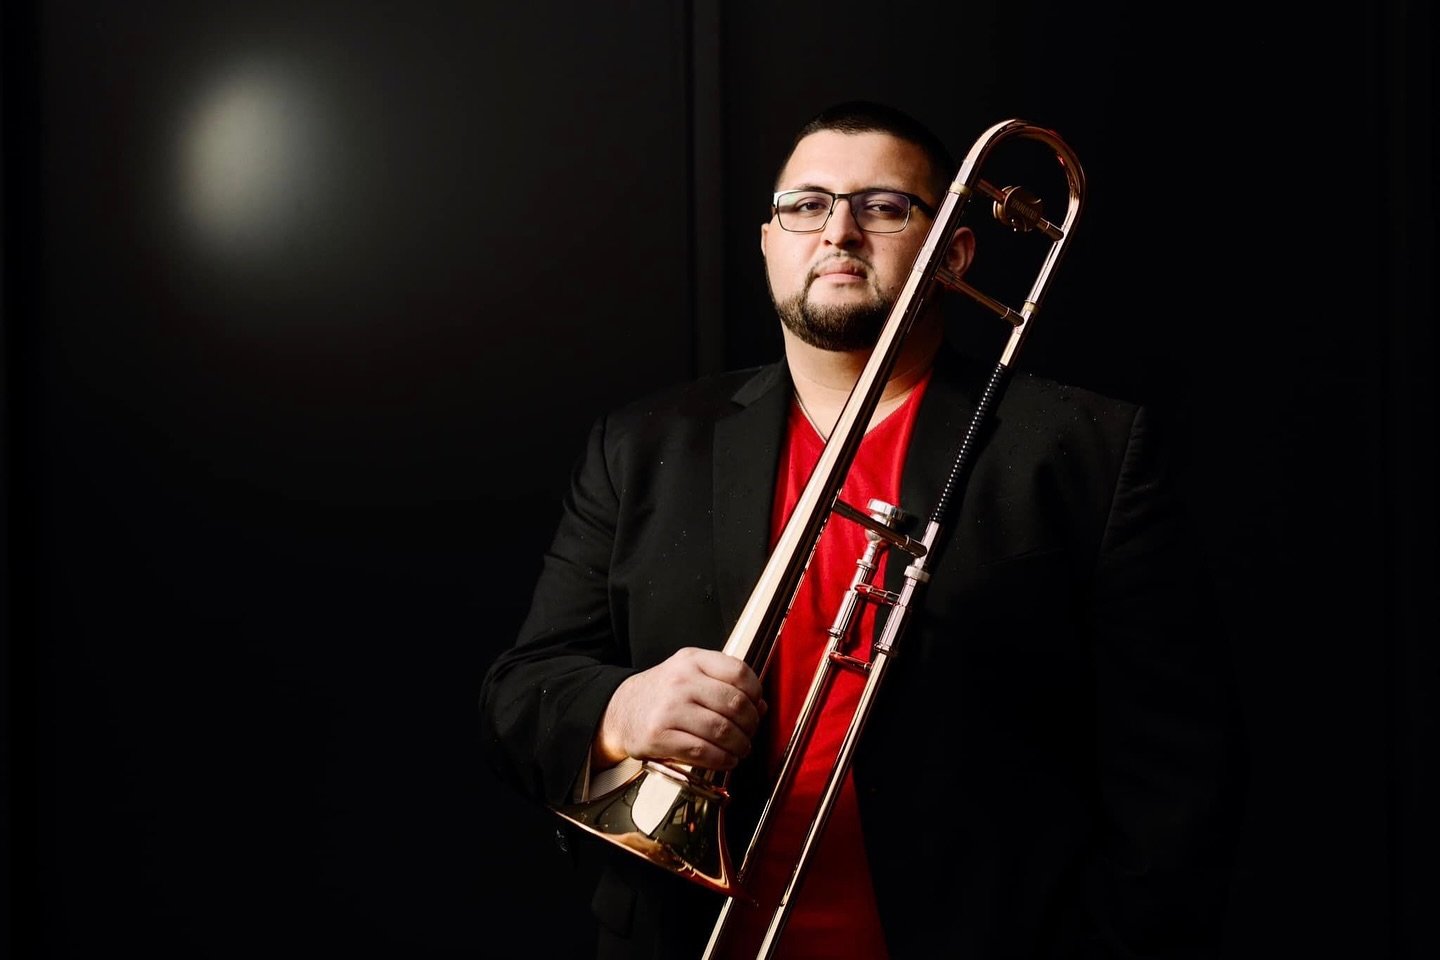 Rising star trombonist Altin Sencalar returns to his former home of Austin to present his new album, Discover the Present, releasing on Posi-Tone Records on March 26 at Parker Jazz Club. Sencalar will present his diverse program of original music and